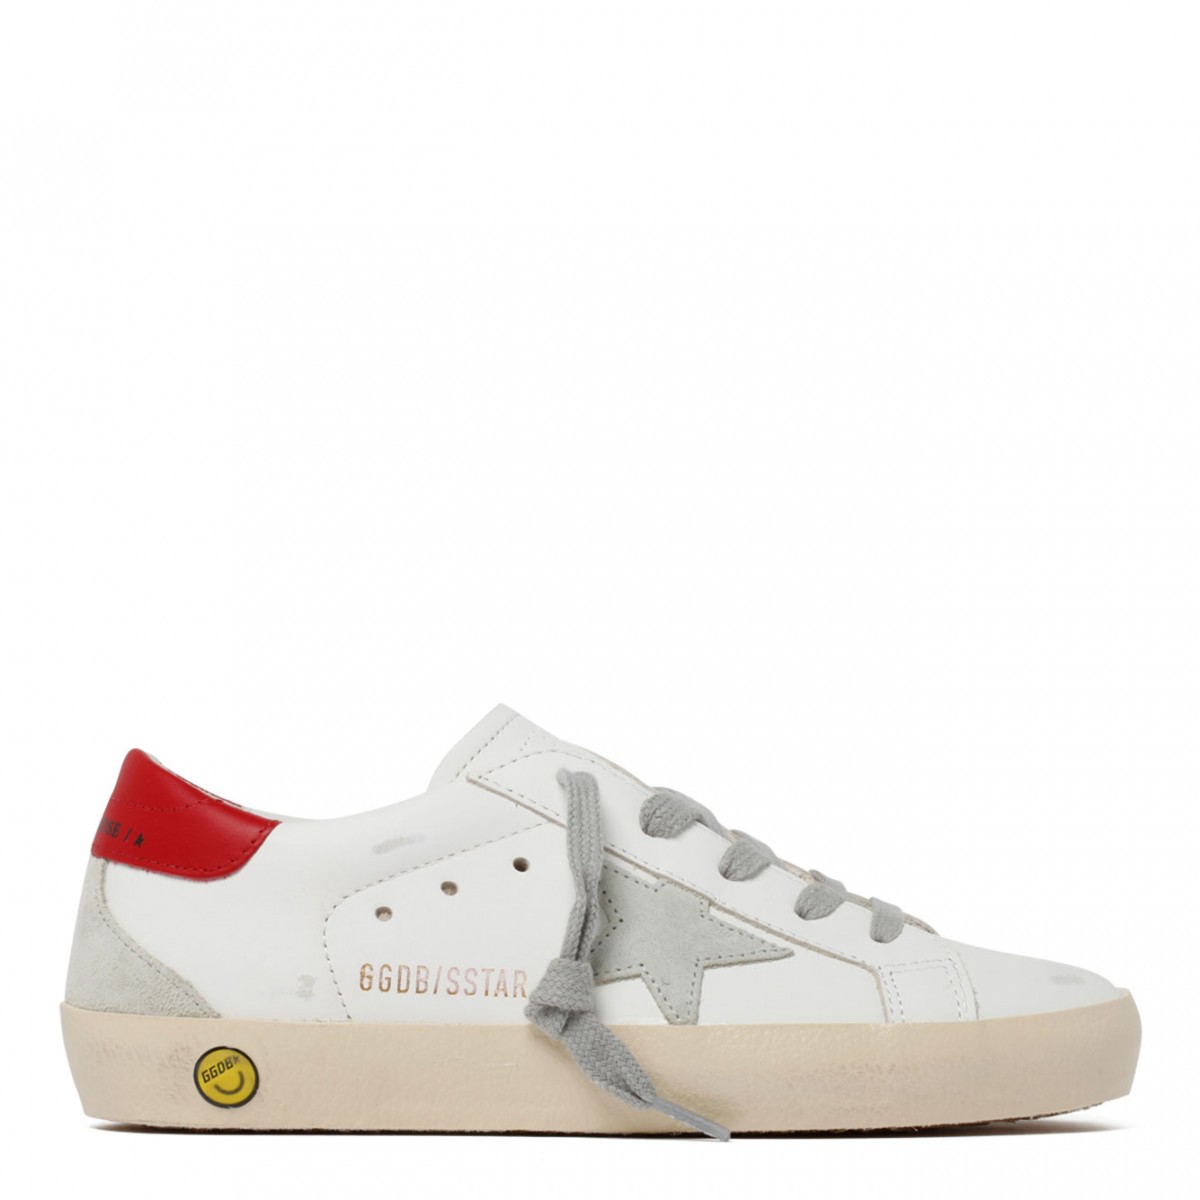 Golden Goose White and Red Super Star Sneakers